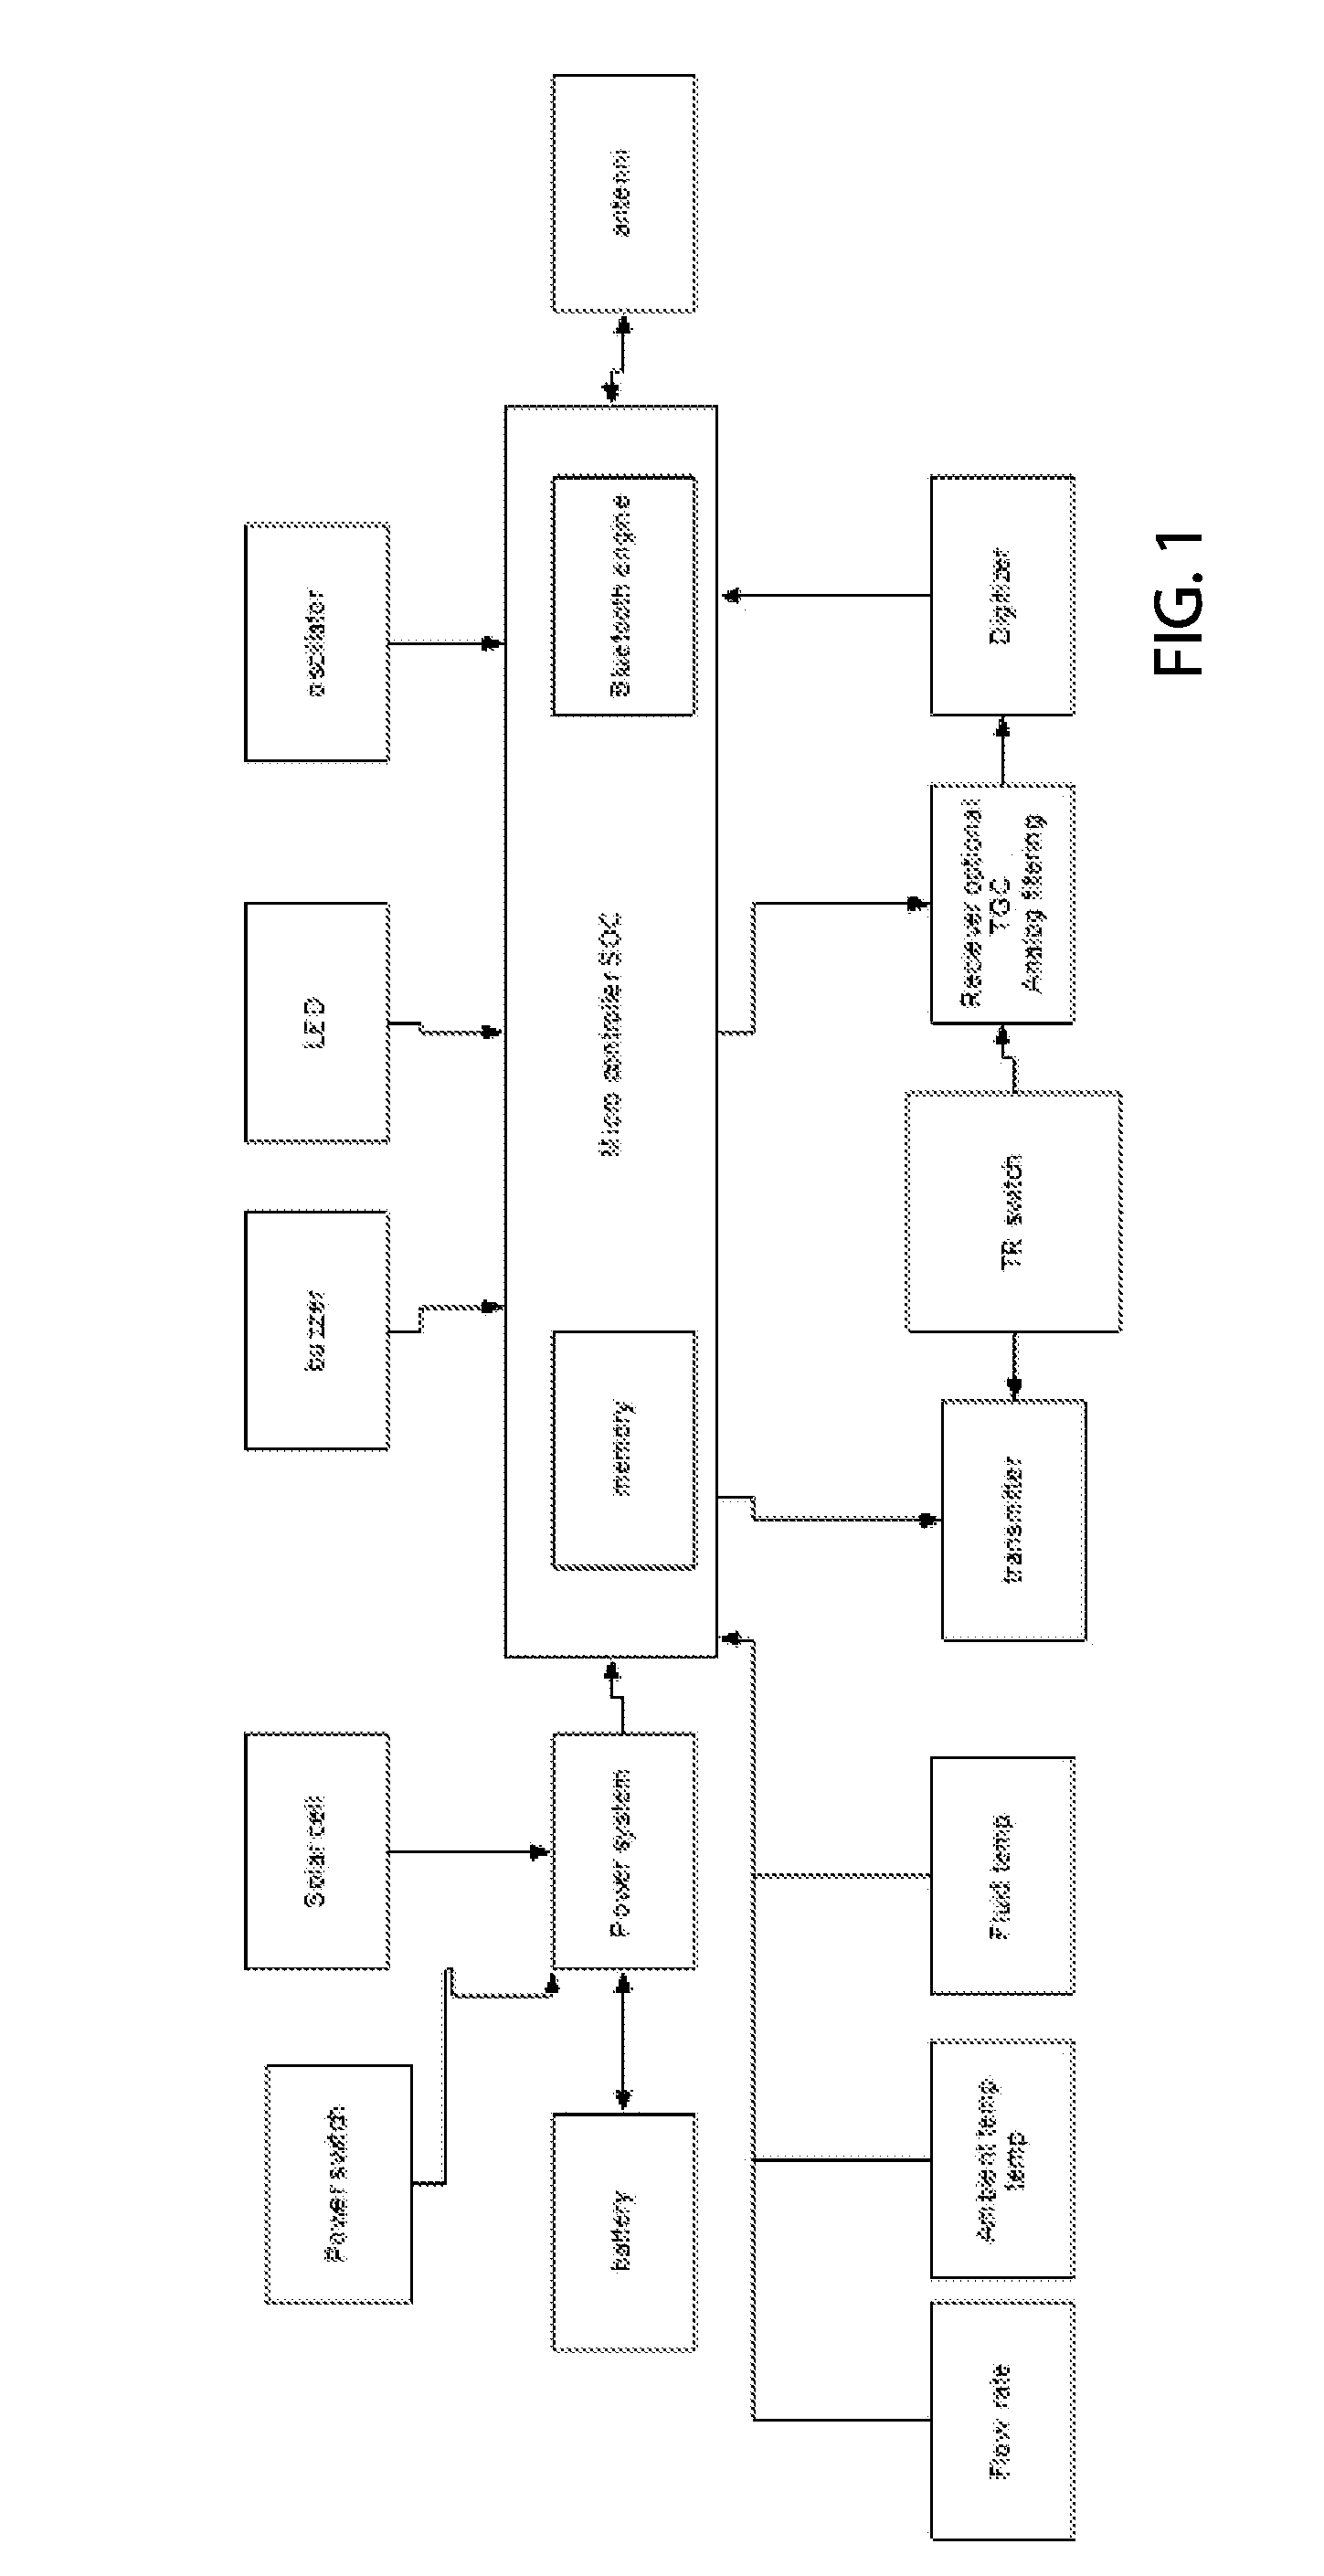 System and method for fish finding using a sonar device and a remote computing device